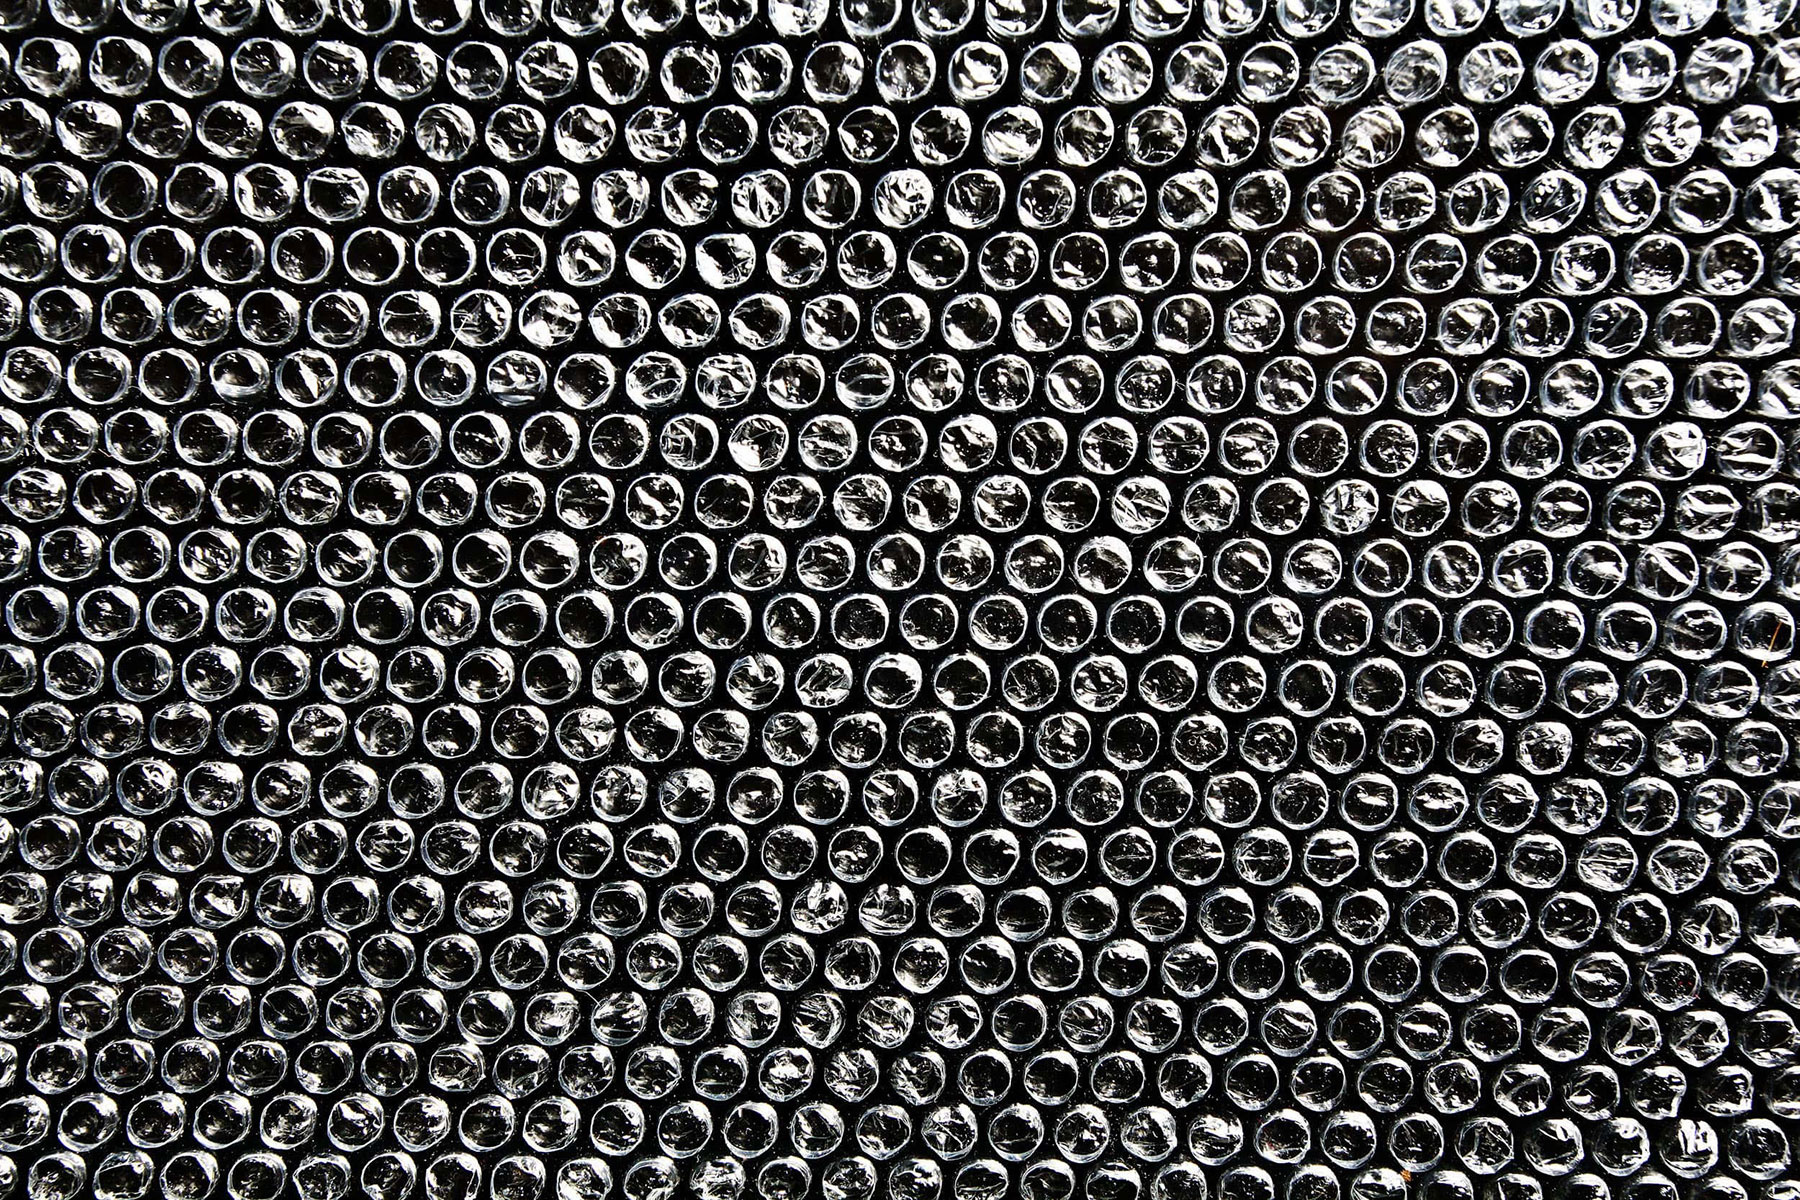 The History of the Bubble Wrap